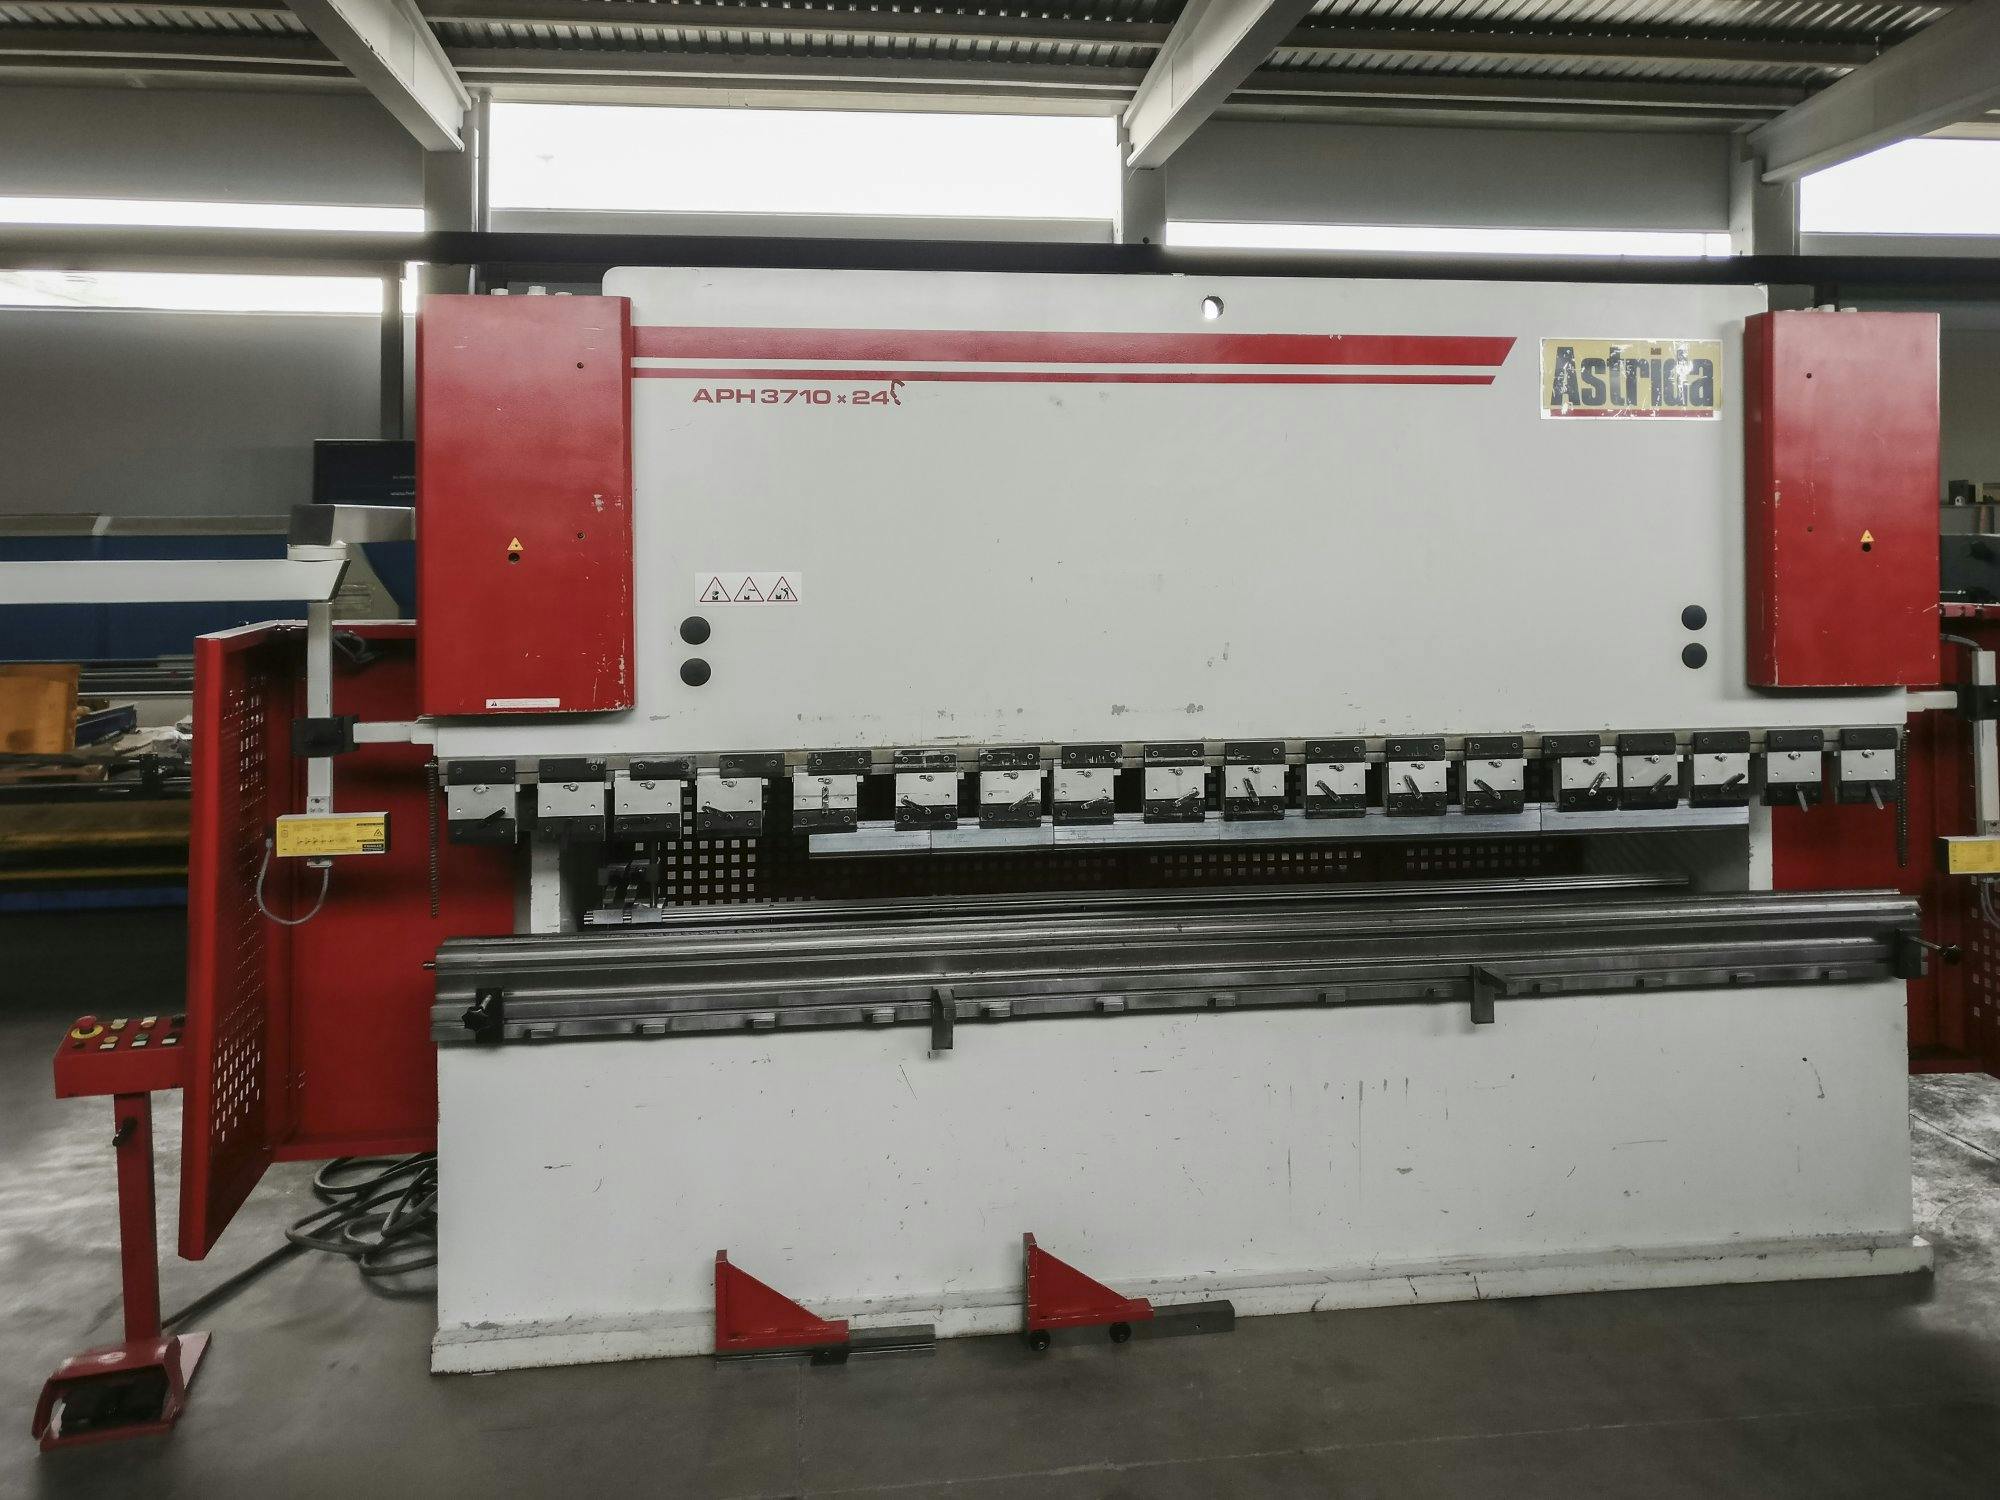 Front view of ASTRIDA-BAYKAL APH 3710x240 Machine